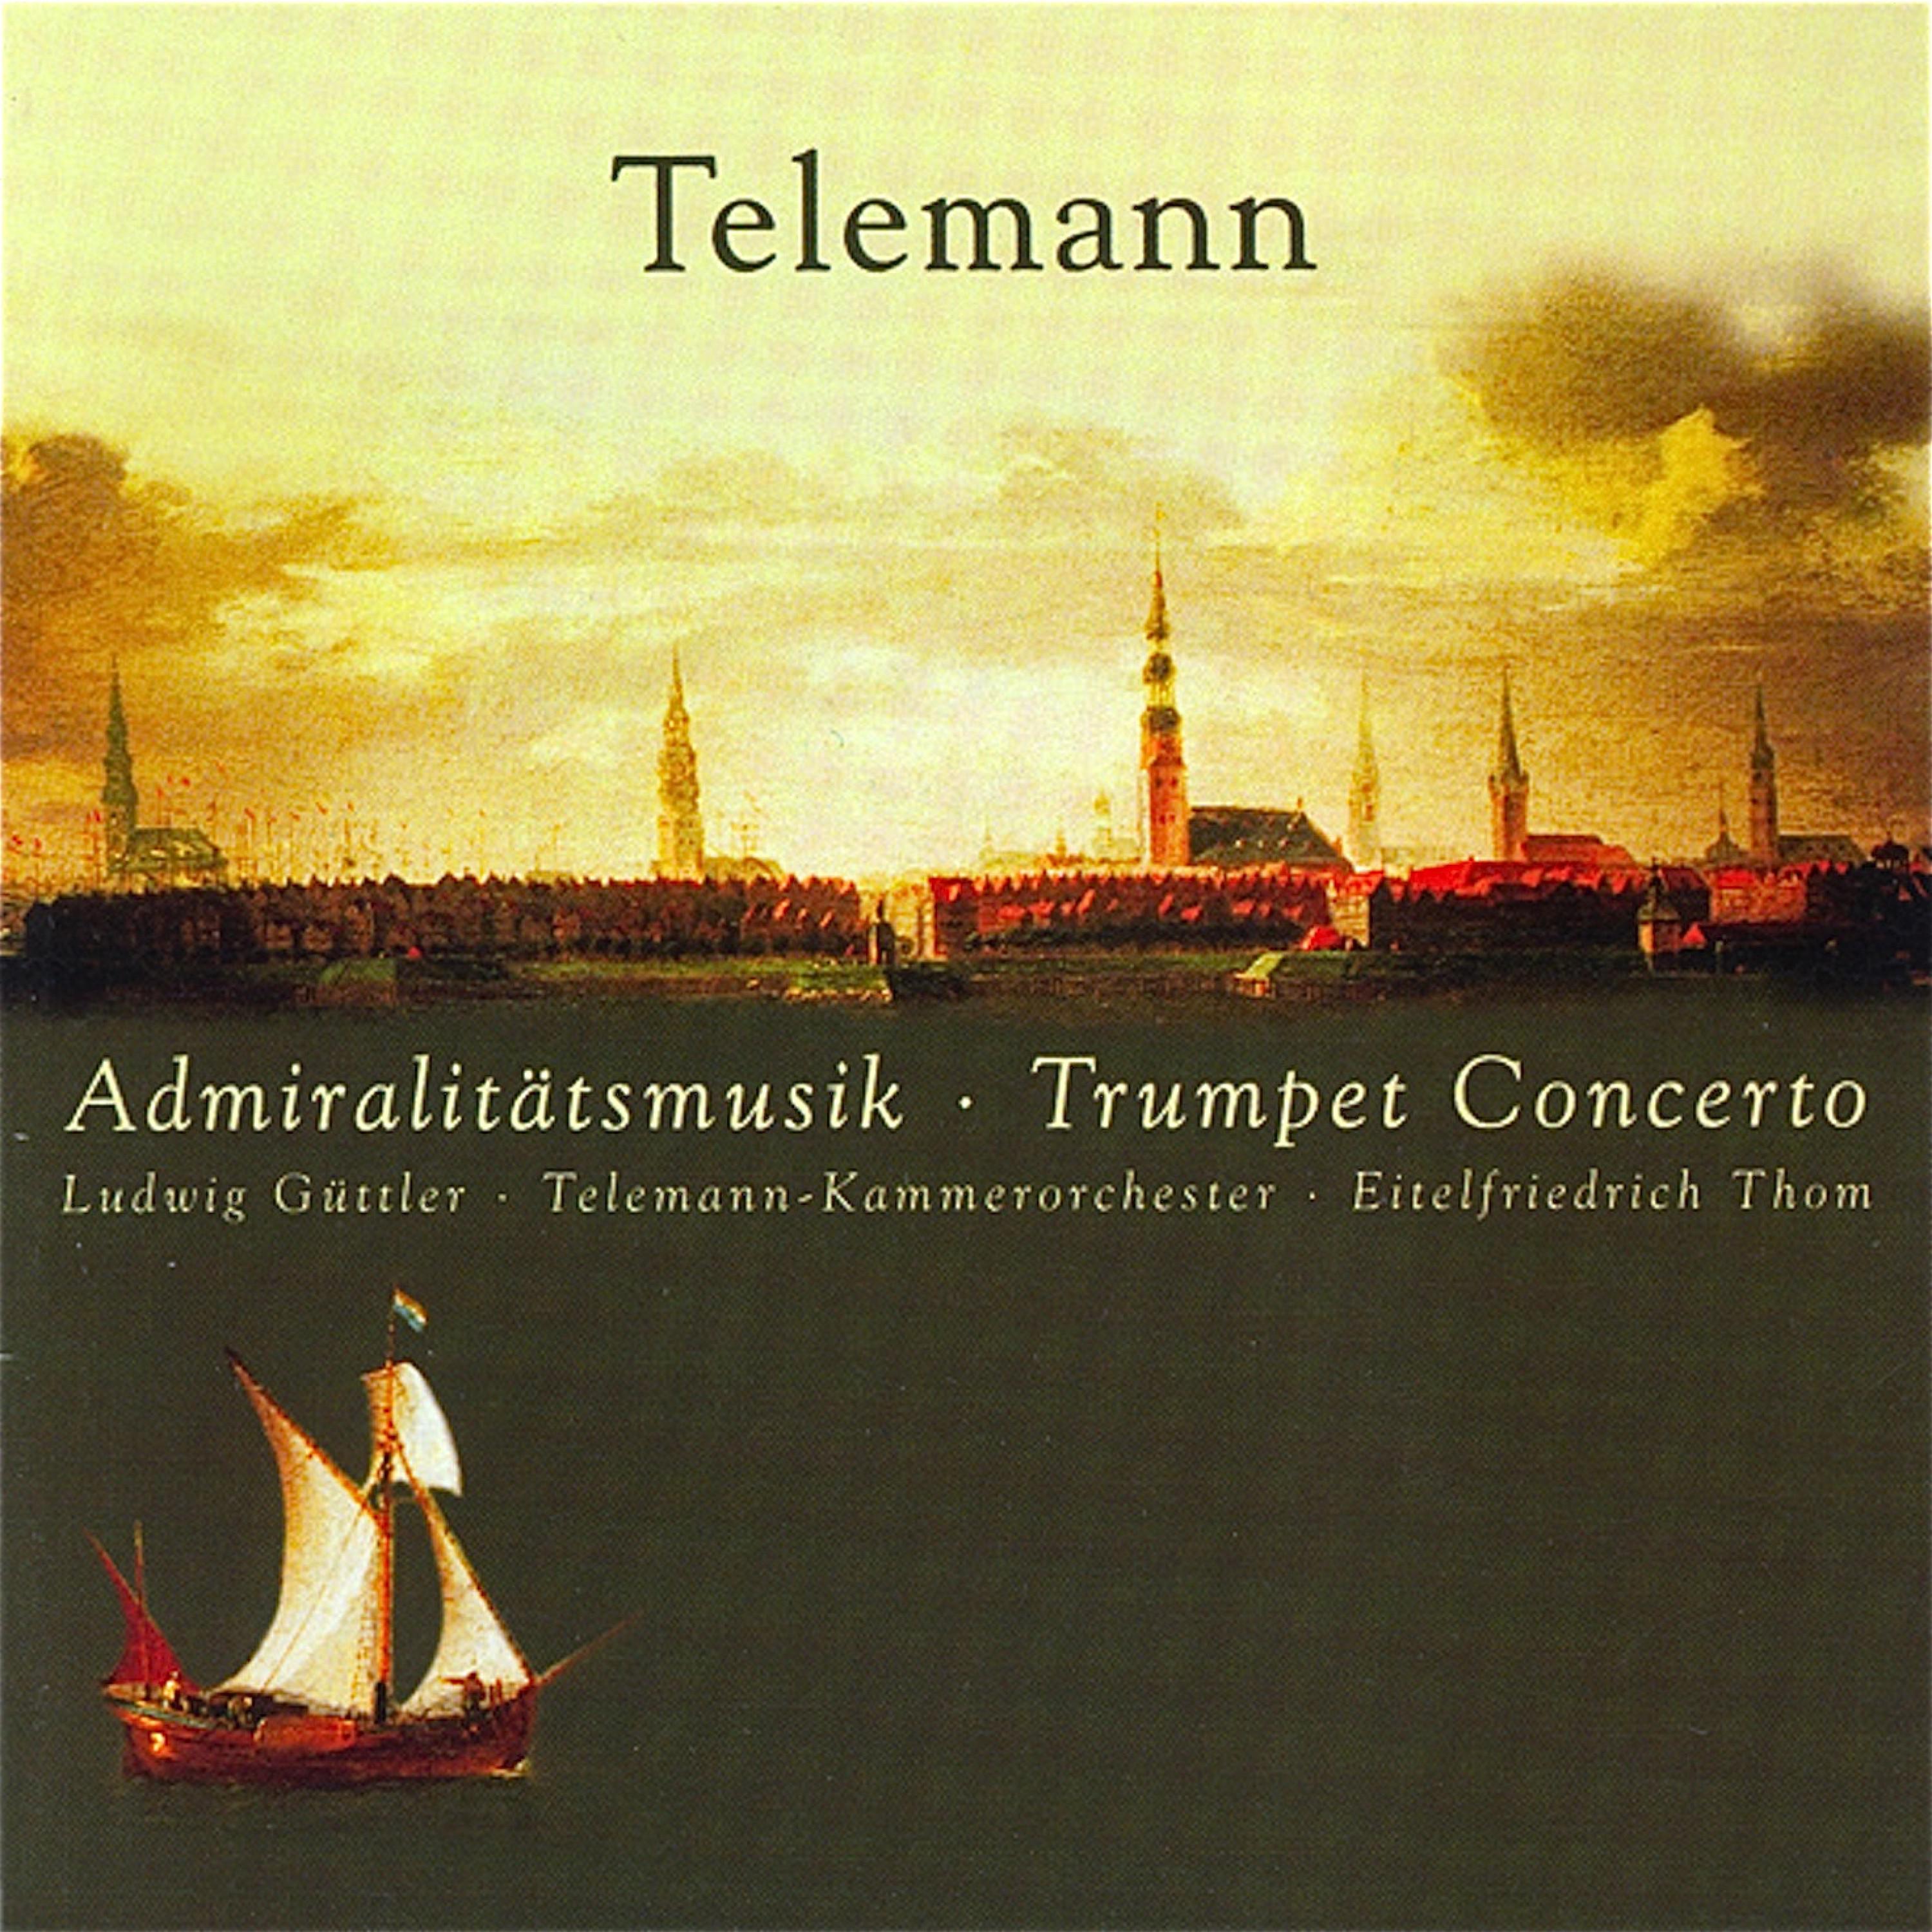 Concerto for 3 Trumpets and Timpani in D Major, TWV 54:D4: II. Allegro